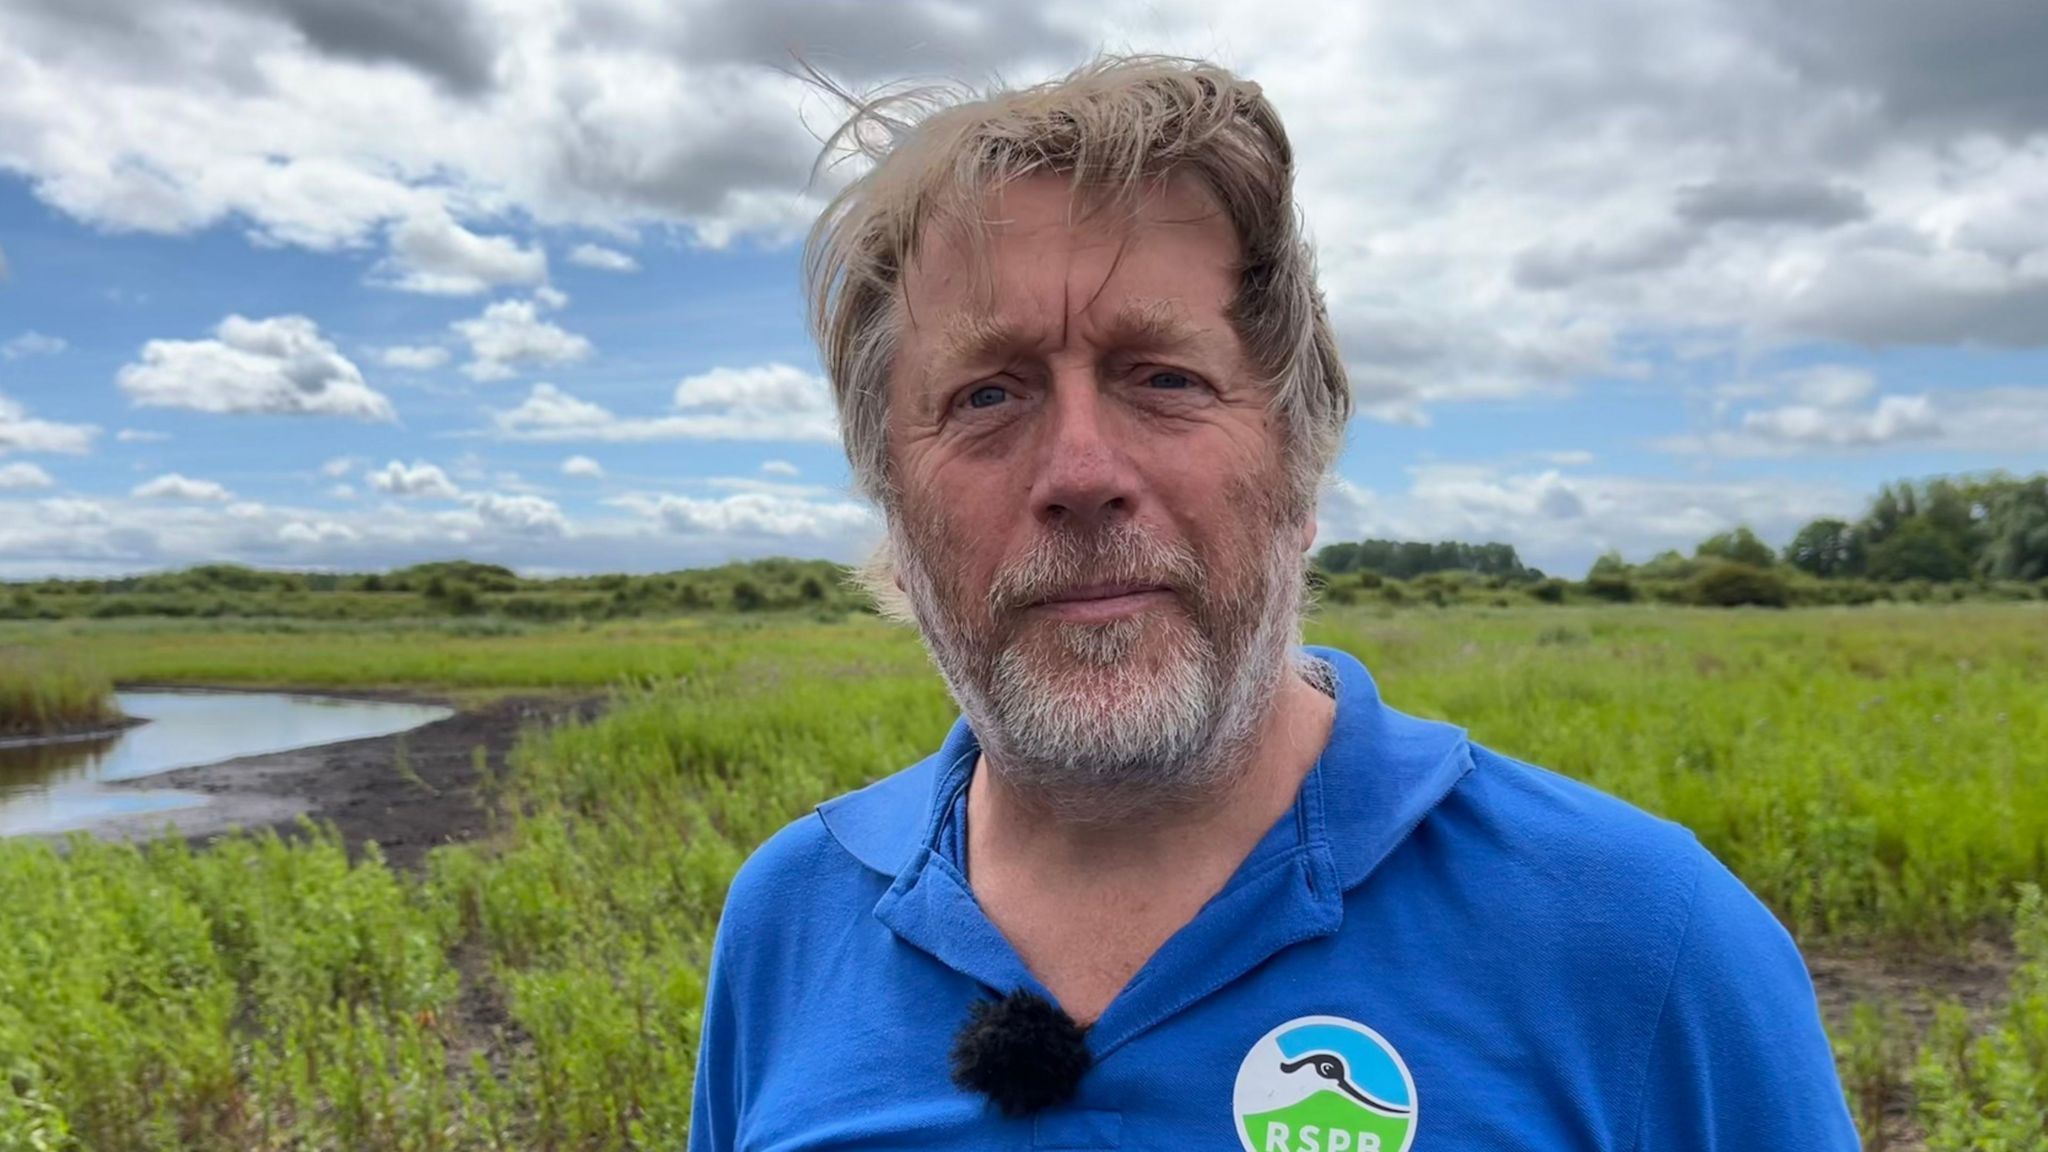 Dave Rogers with windswept hair against the green background of Lakenheath Fen, Suffolk